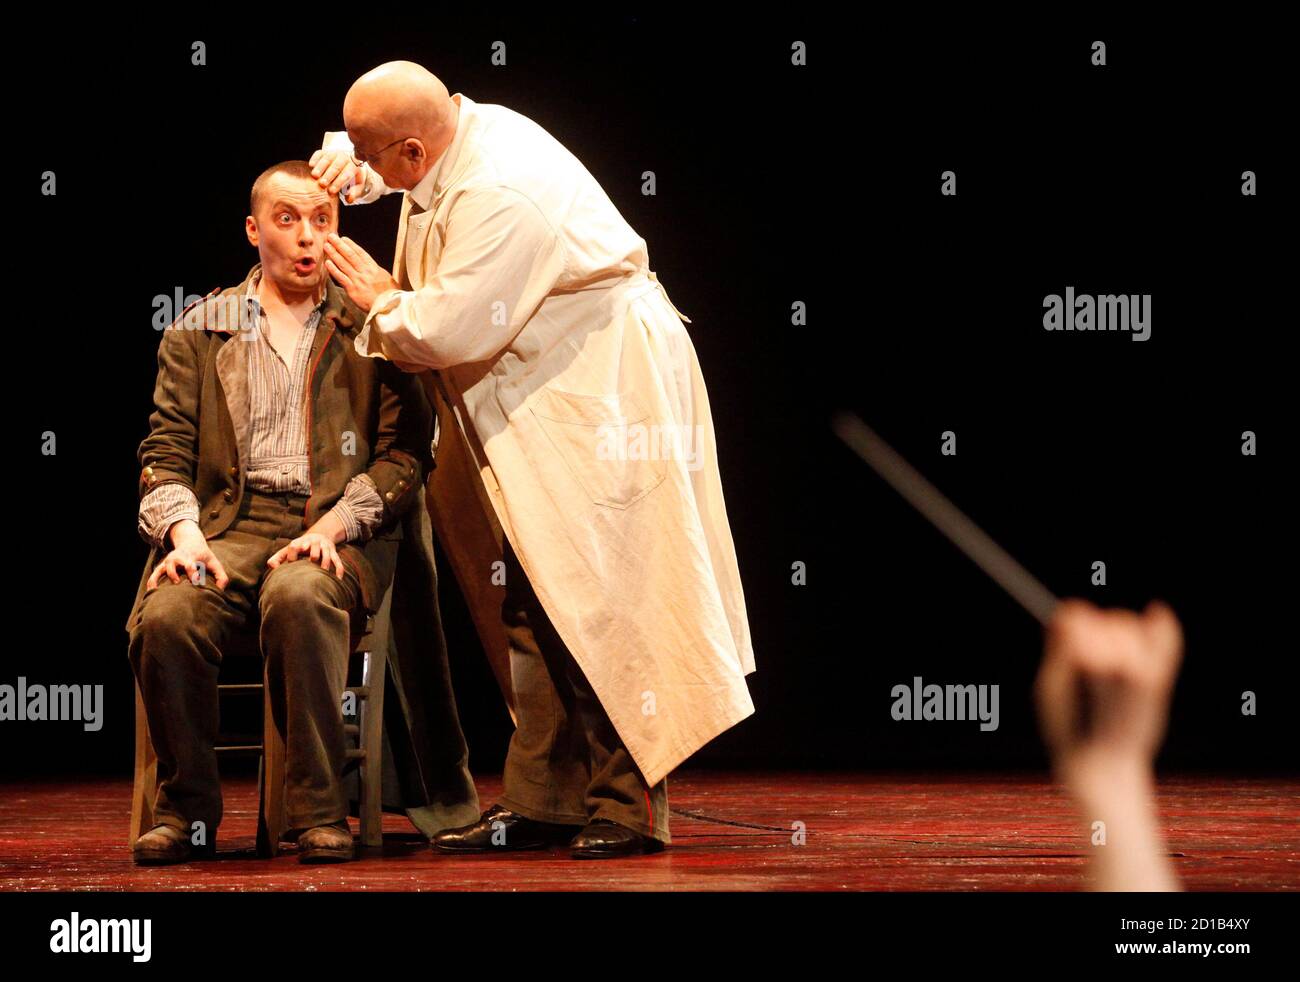 Singers Georg Nigl and Wolfgang Bankl (R) perform as Wozzeck and Professor  during a dress rehearsal of Alban Berg's opera "Wozzeck" on stage at Vienna's  Theater an der Wien May 12, 2010.